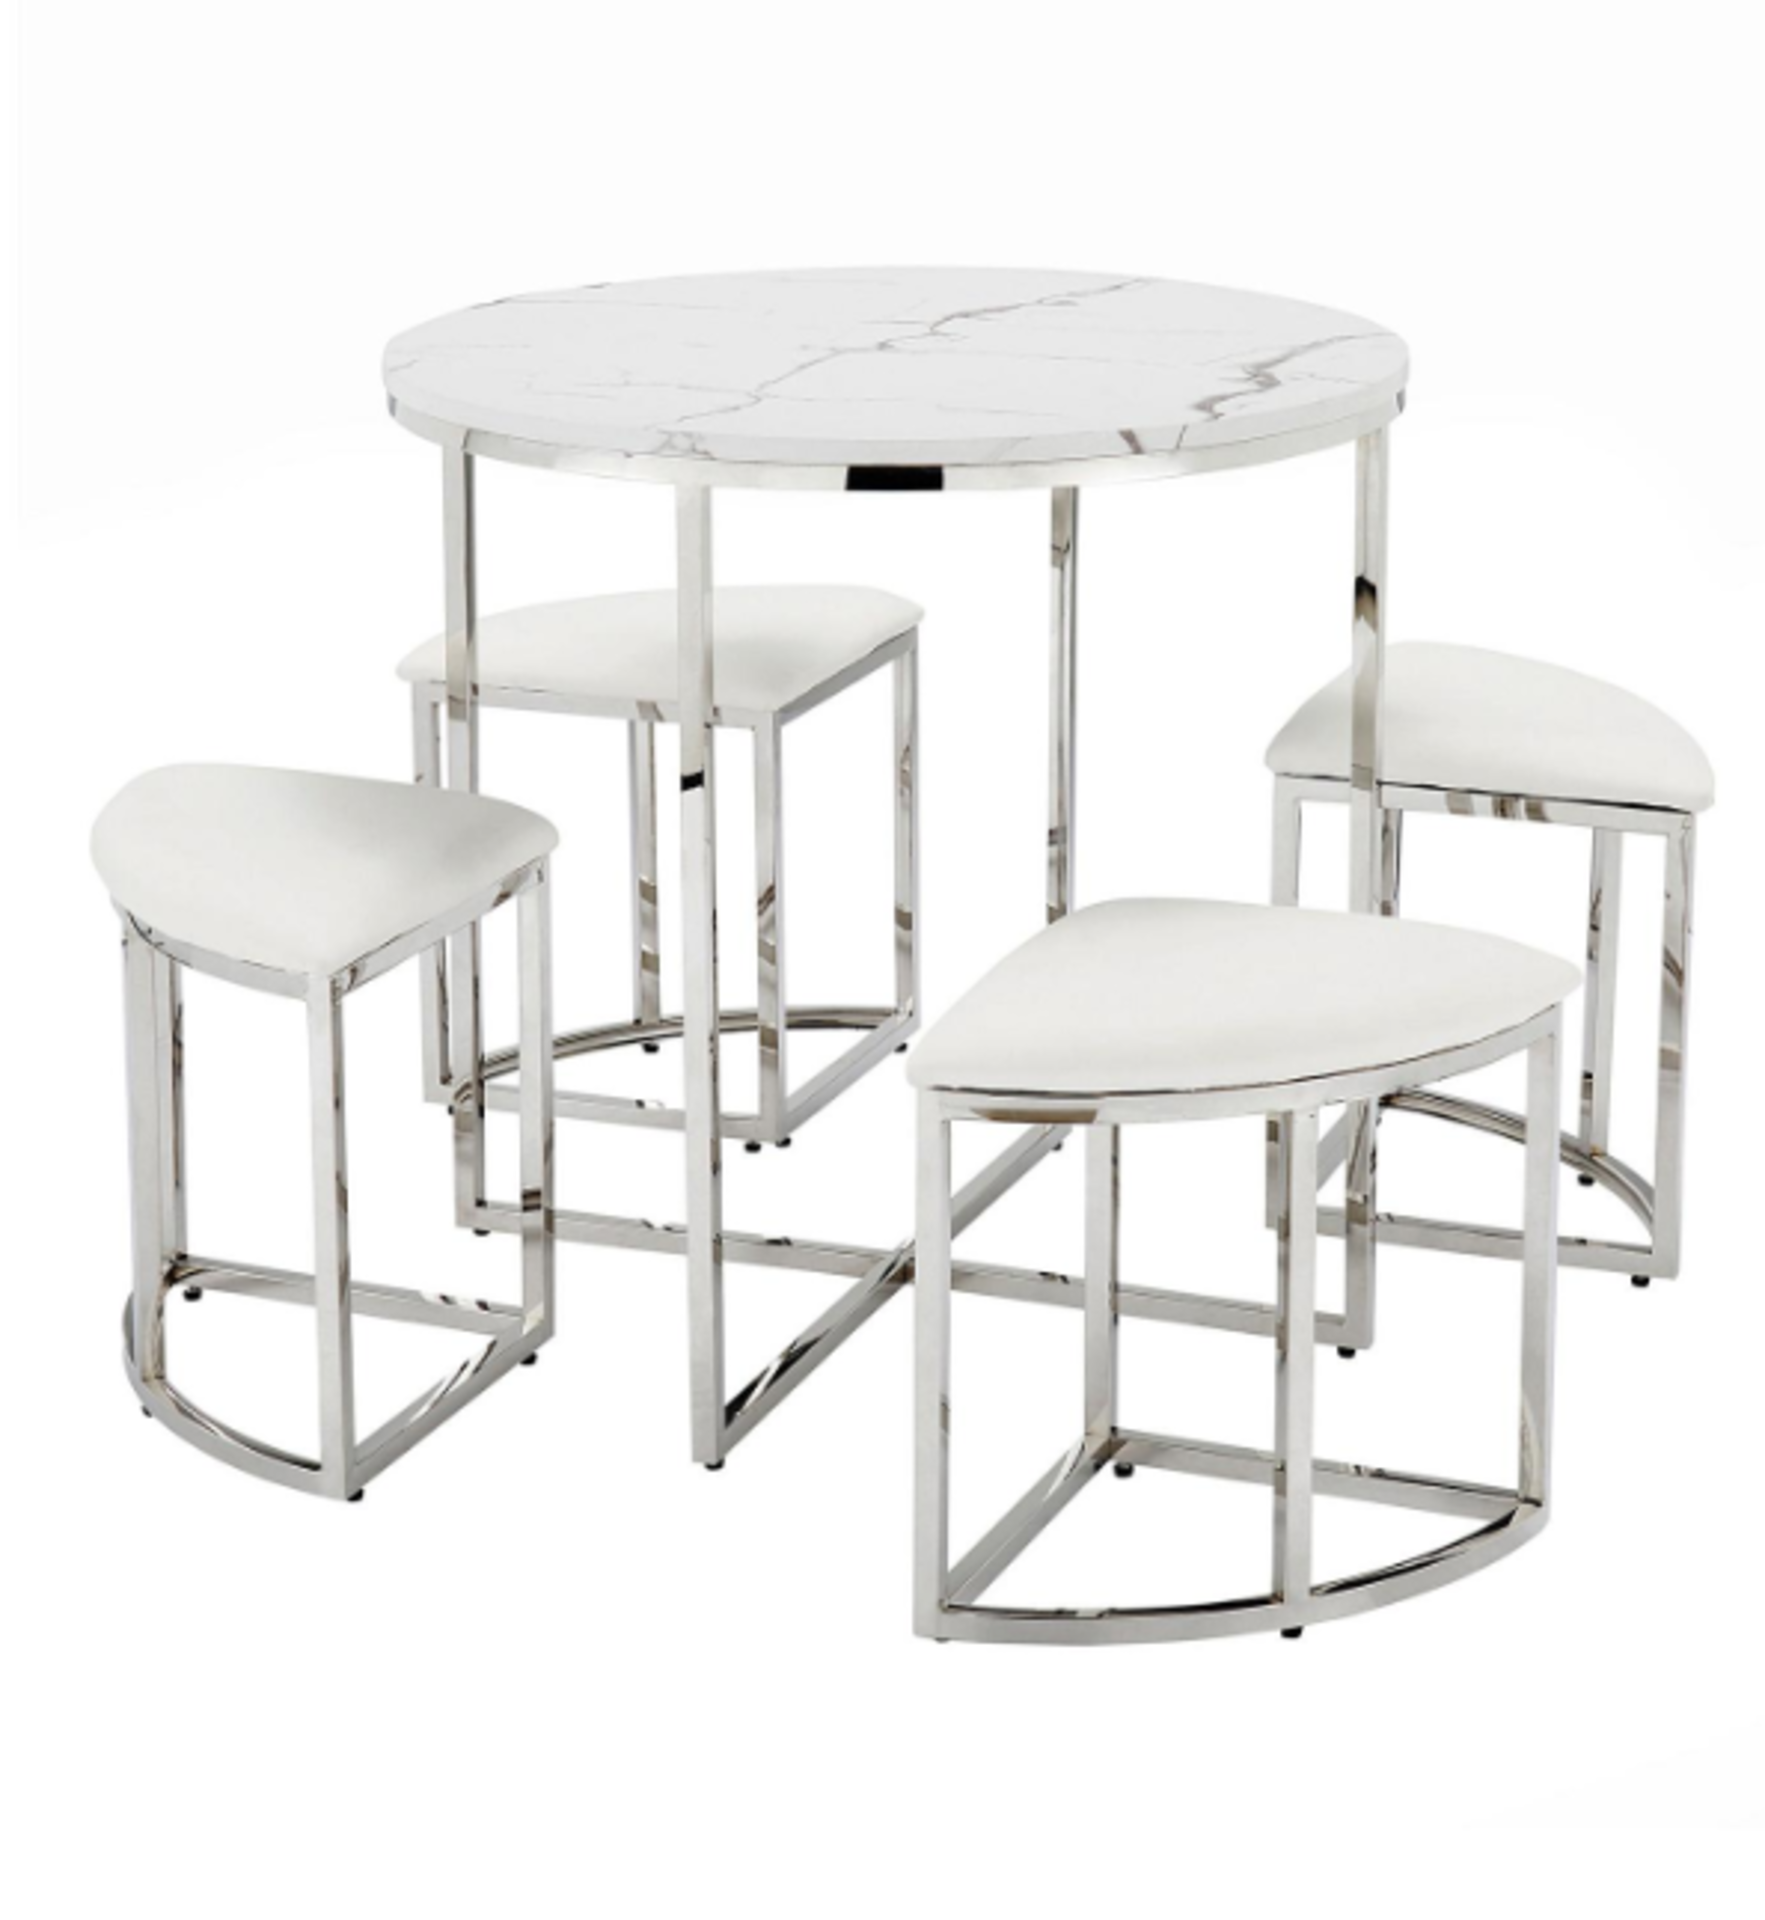 Trade Lot 4 x New & Boxed Milan Hideaway Space Saving Dining Sets. RRP £399 each. If you’re - Image 4 of 4